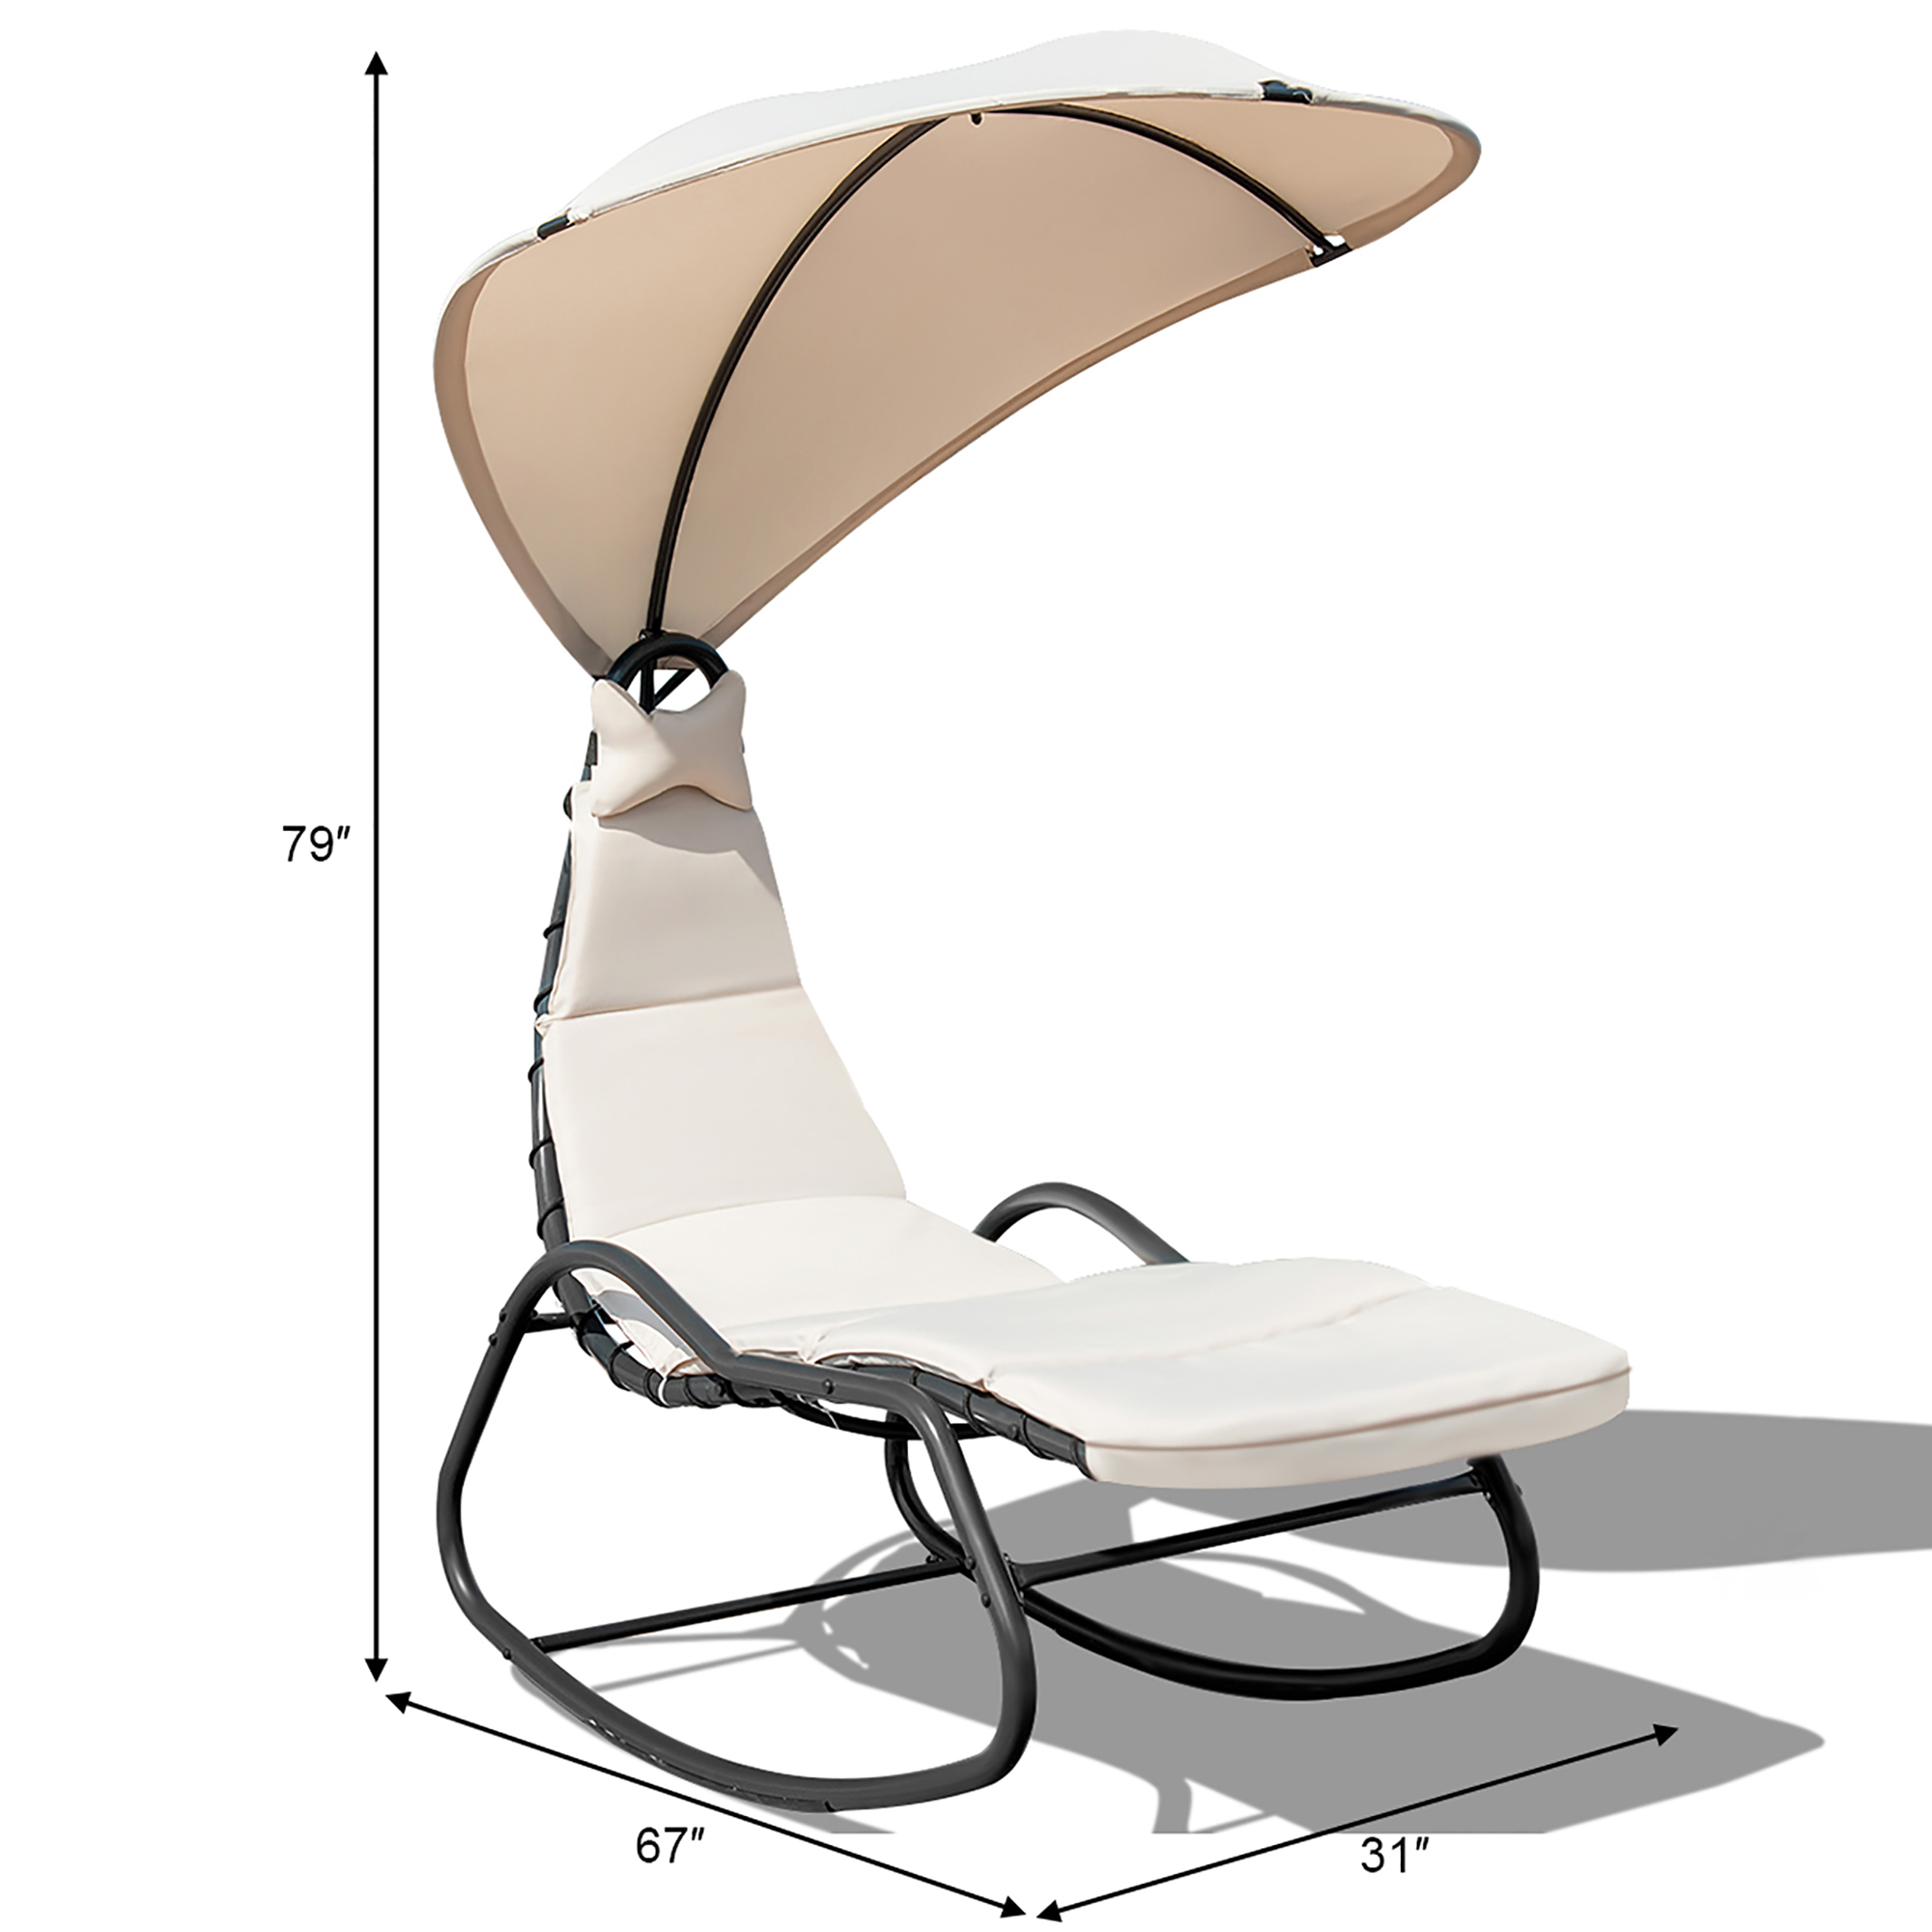 Costway  Patio Hanging Chaise Lounge Swing Canopy Cushion Beige - image 5 of 8